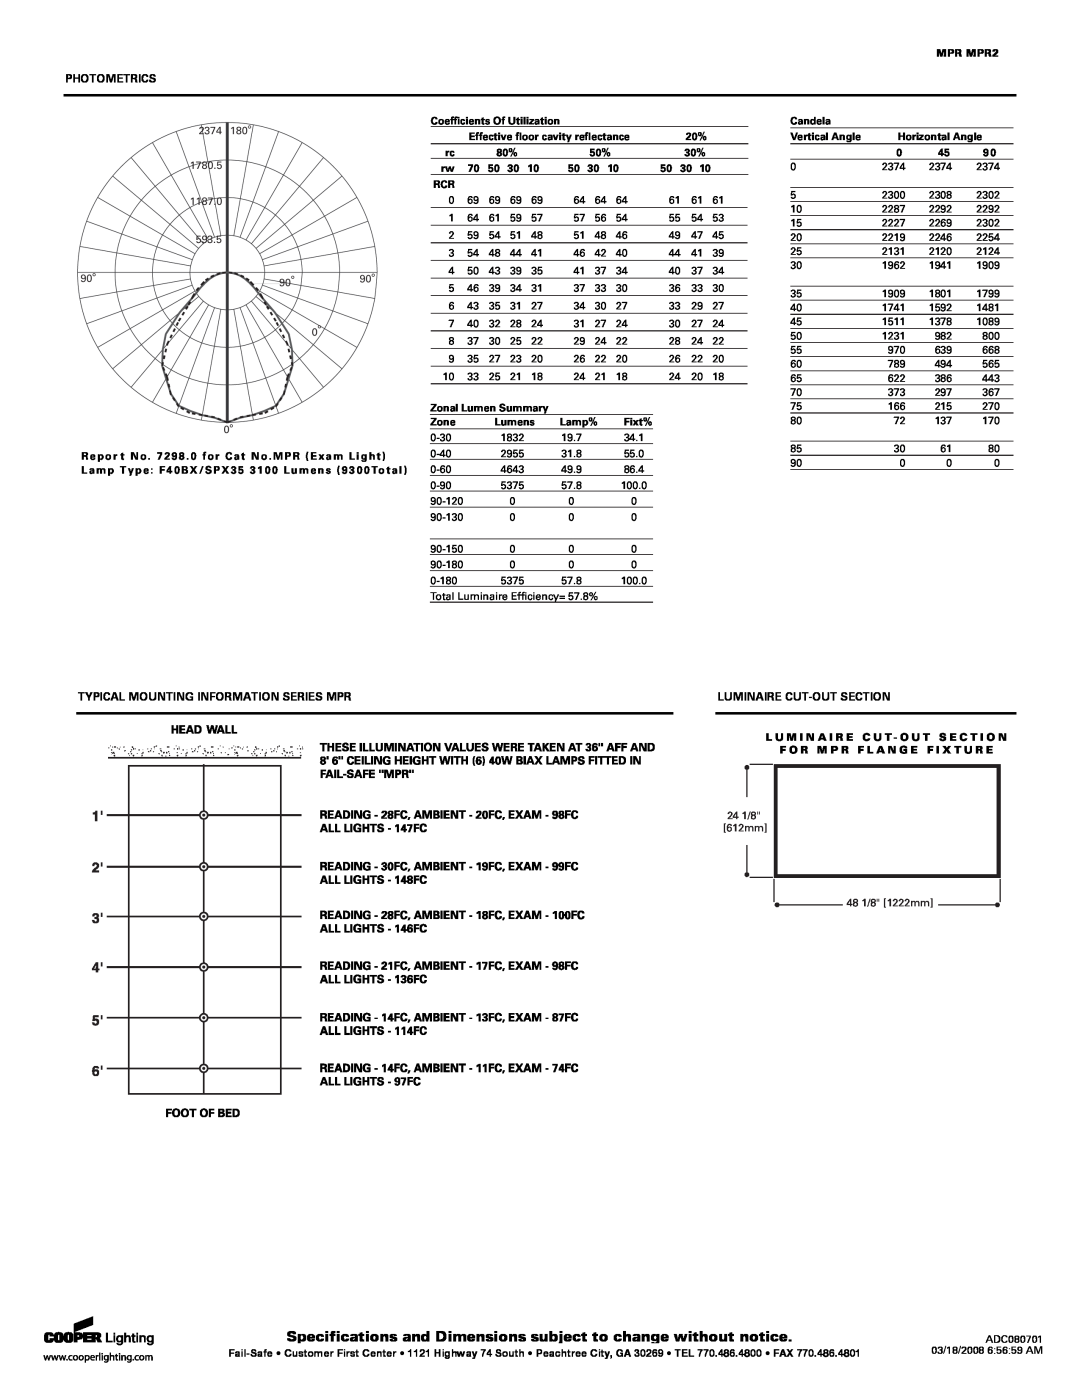 Cooper Lighting MPR2 specifications Typical Mounting Information Series Mpr, Luminaire Cut-Outsection 